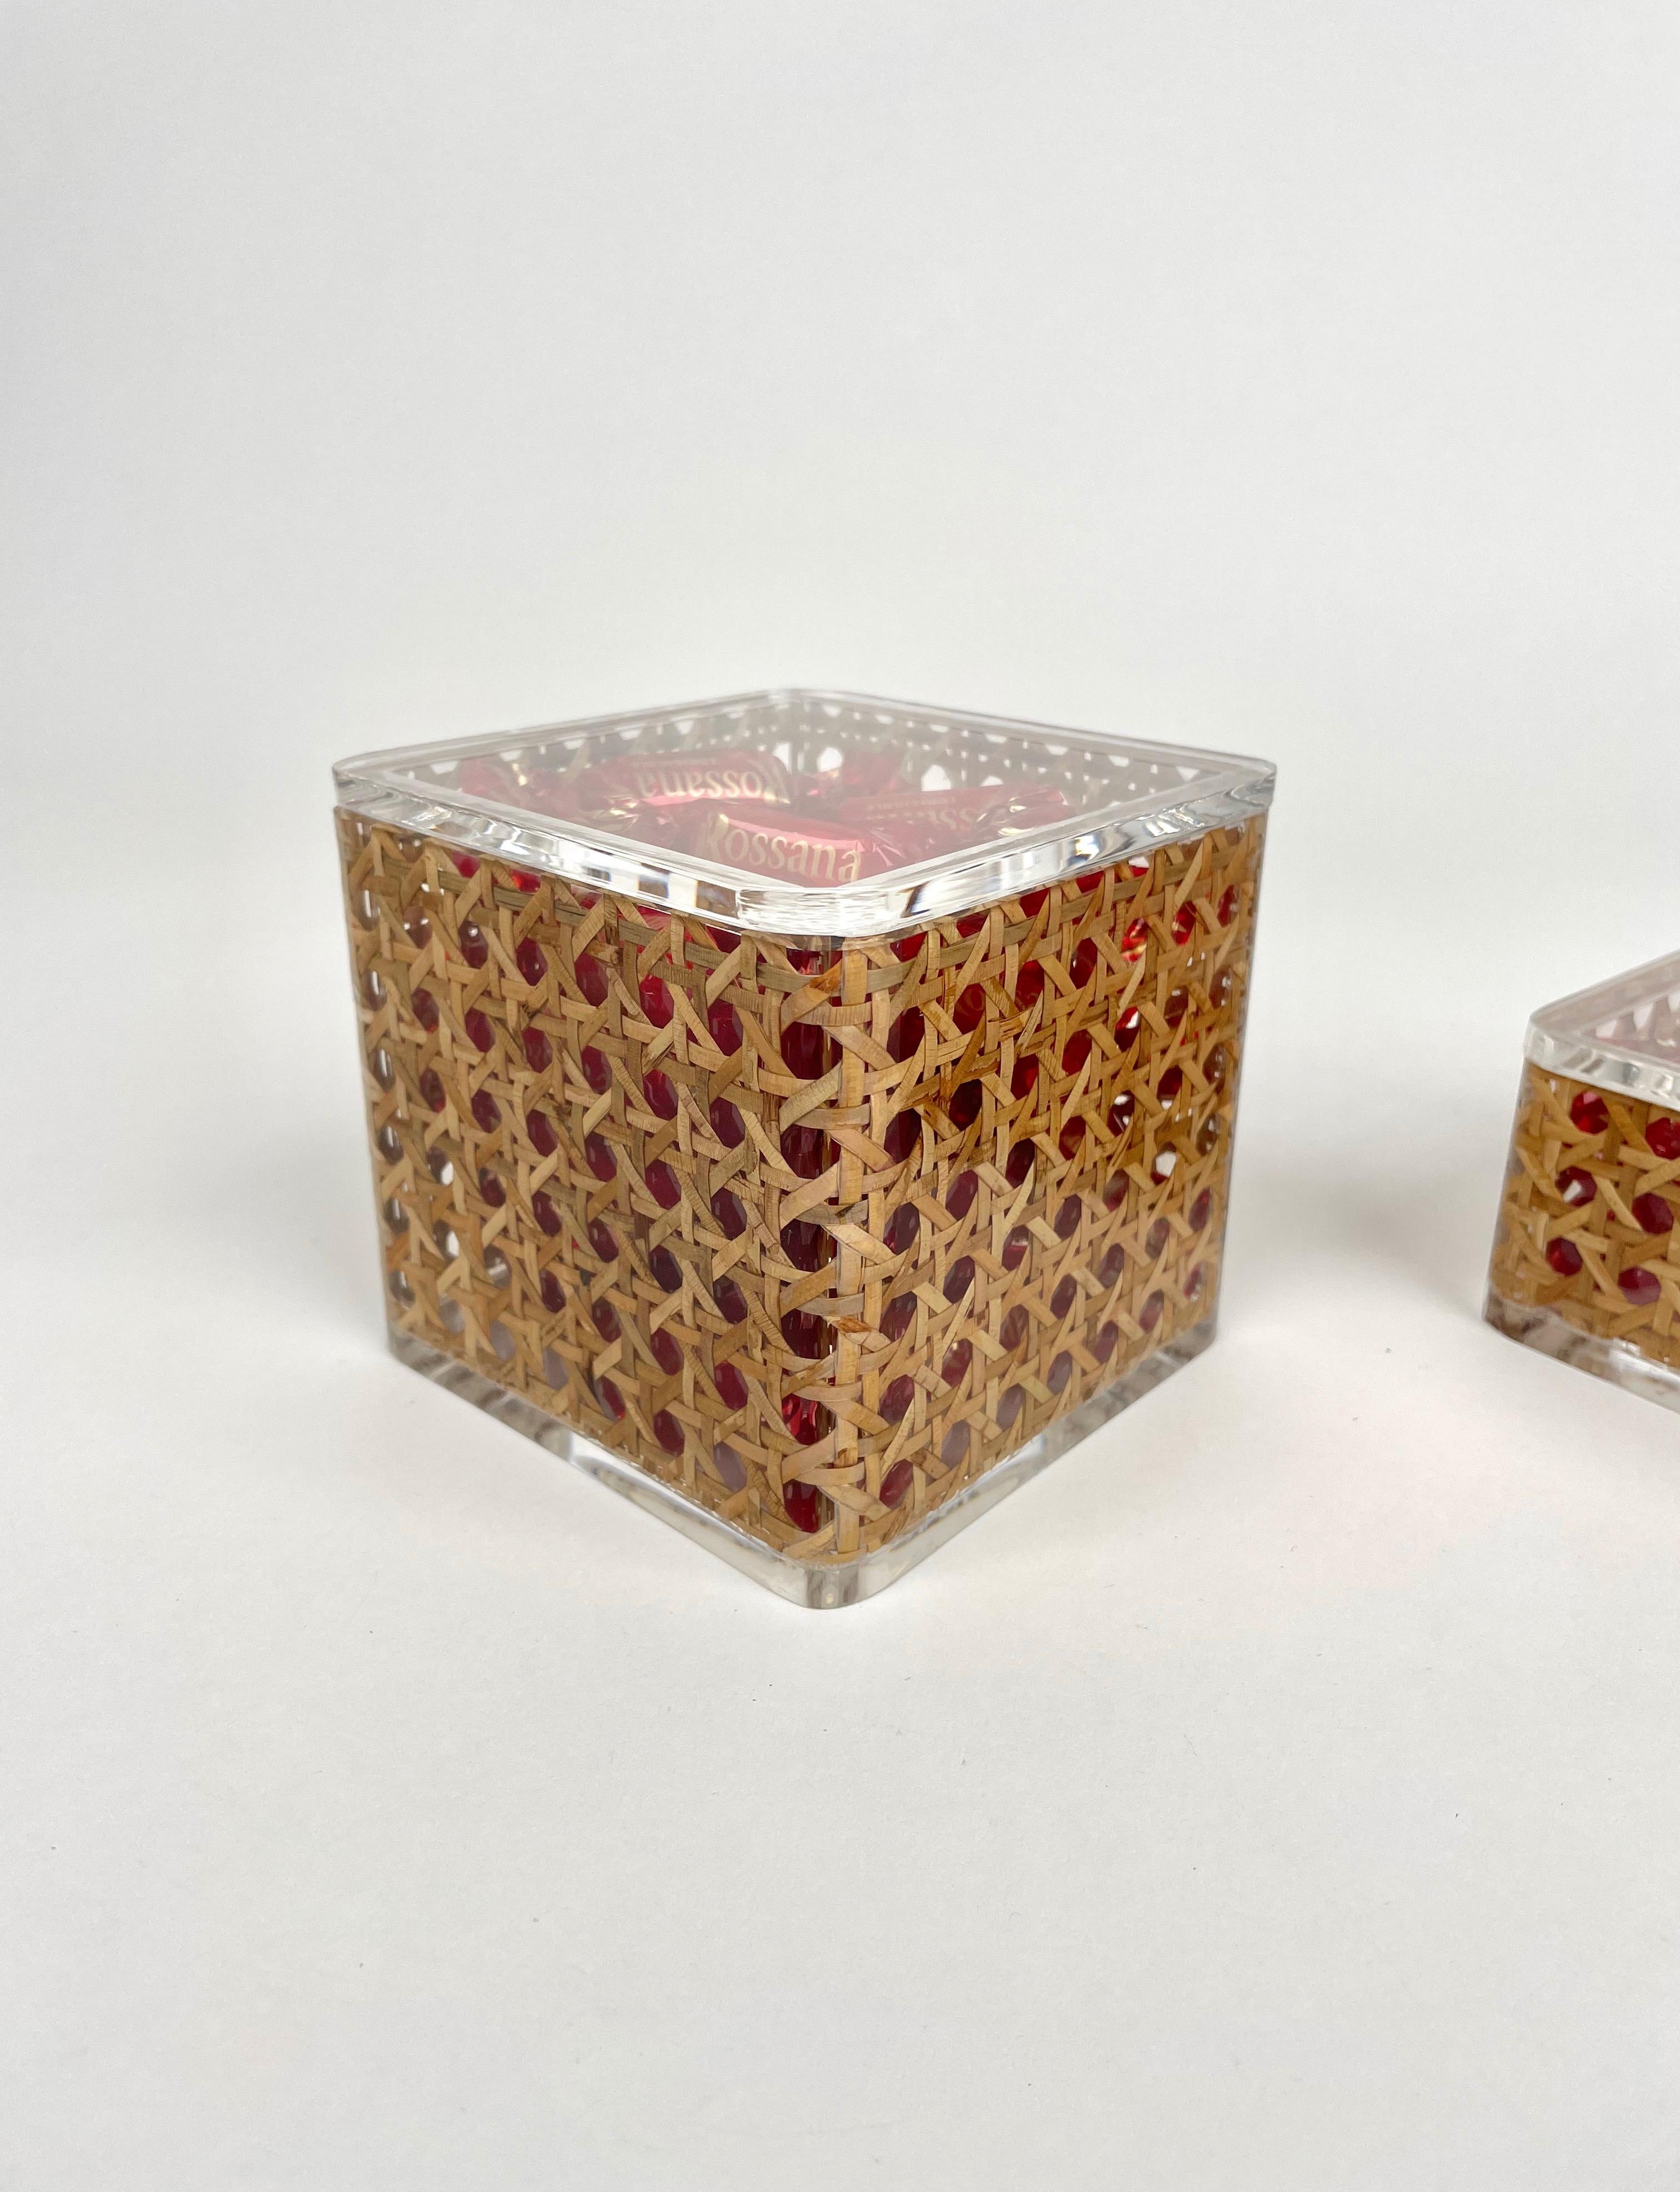 Pair of Box in Lucite & Rattan Christian Dior Home Style, Italy, 1970s For Sale 2